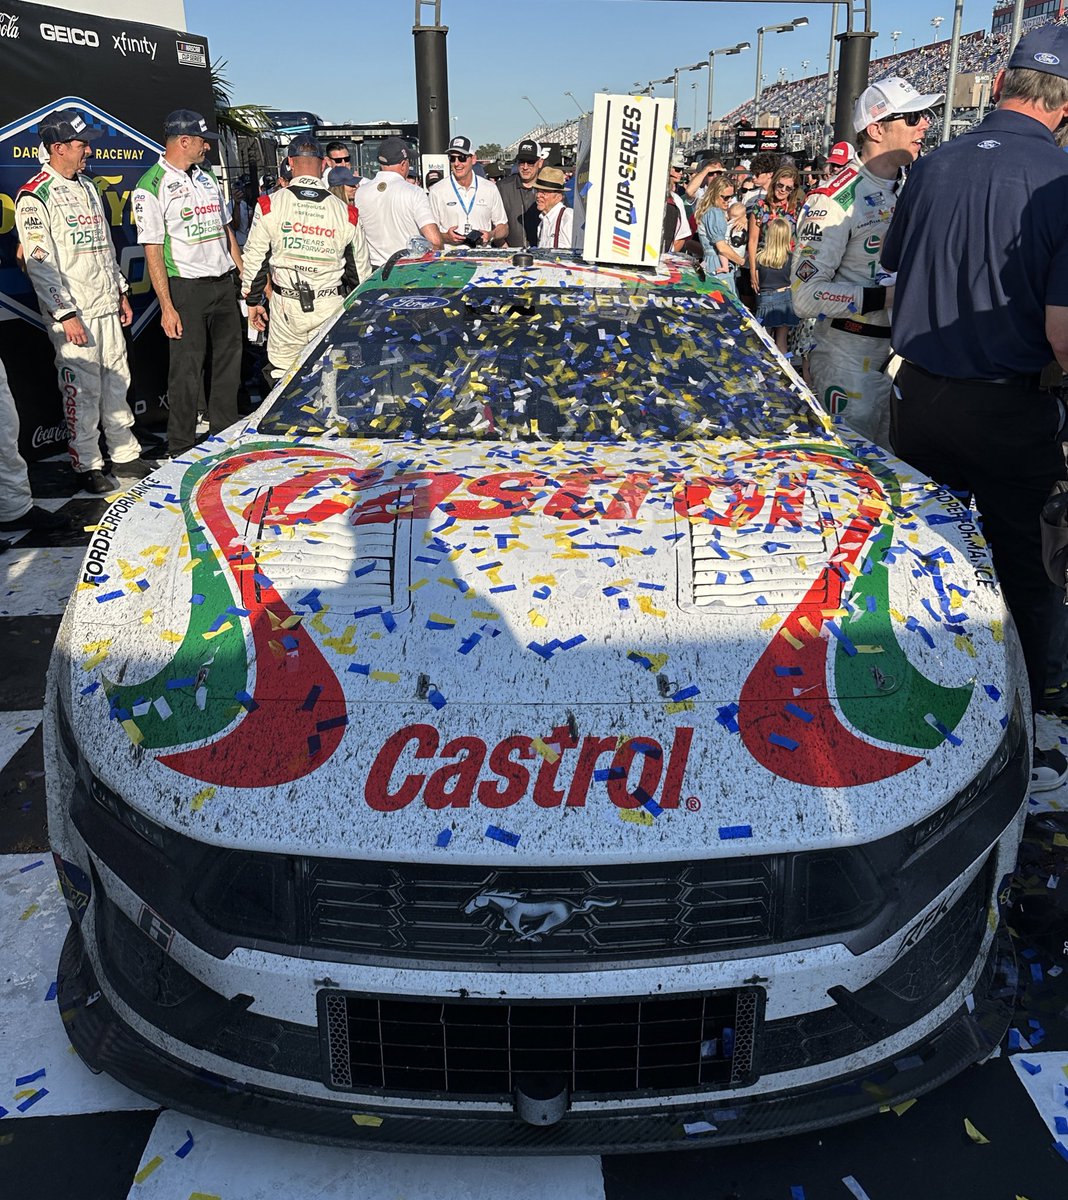 RFK RACING WIN AT DARLINGTON! 🏆 The striking Castrol throwback livery on the @RFKRacing #6 car WON - @Keselowski takes his first victory as a team owner and breaks his 110-race drought! We couldn’t be prouder of the whole team! 👏 #Castrol #NASCAR